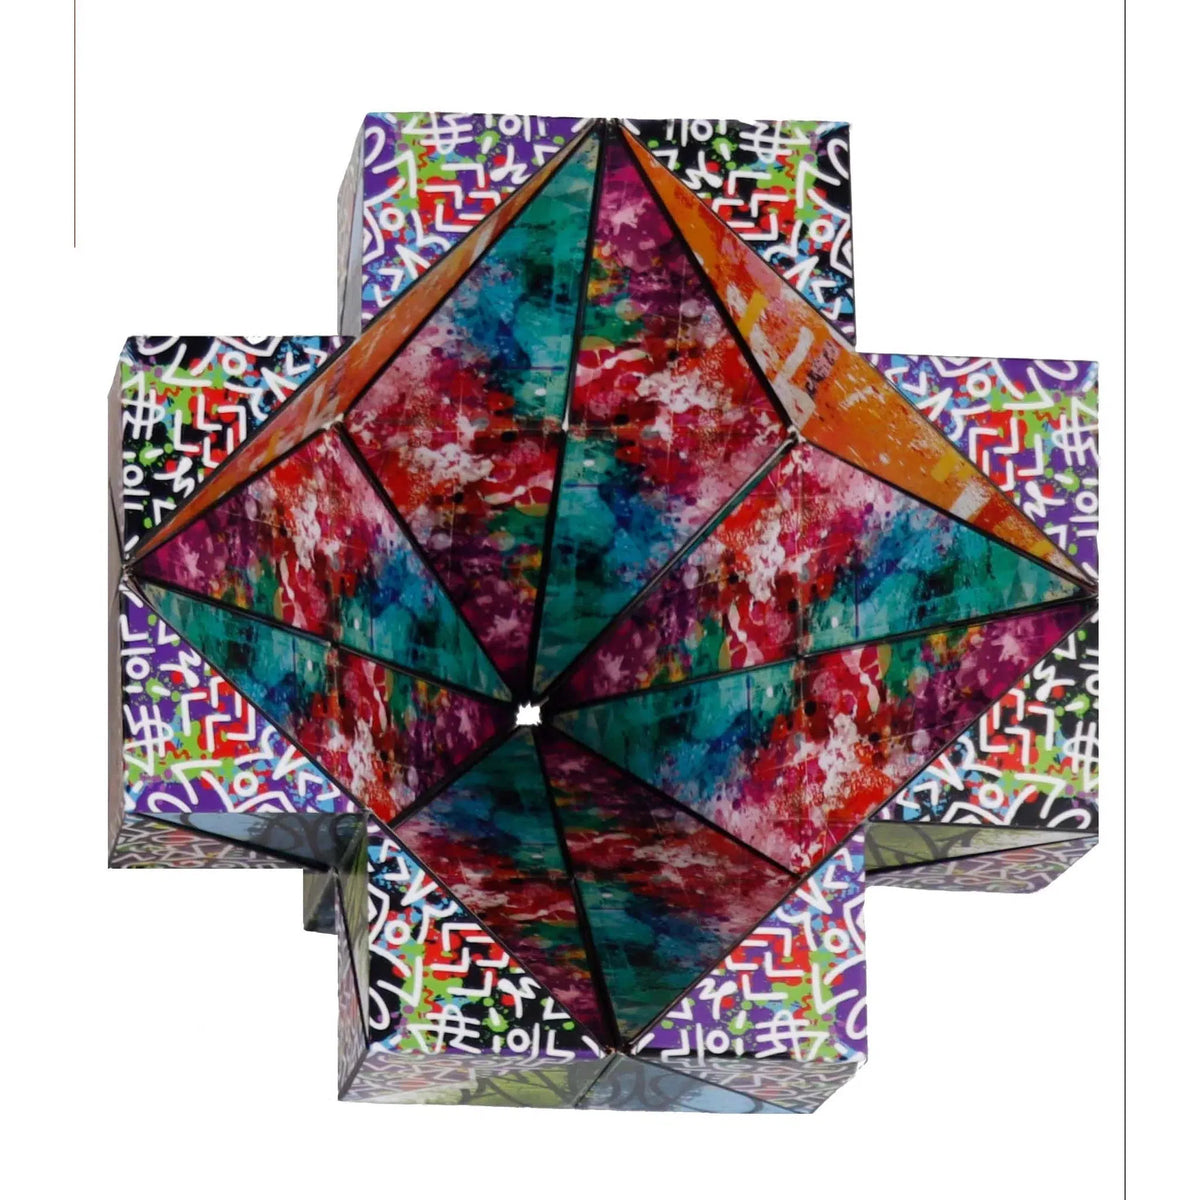 Front view of CUBENDI-Geometric Origami Puzzle-Scribble out of box and unfolded to show different patterns.